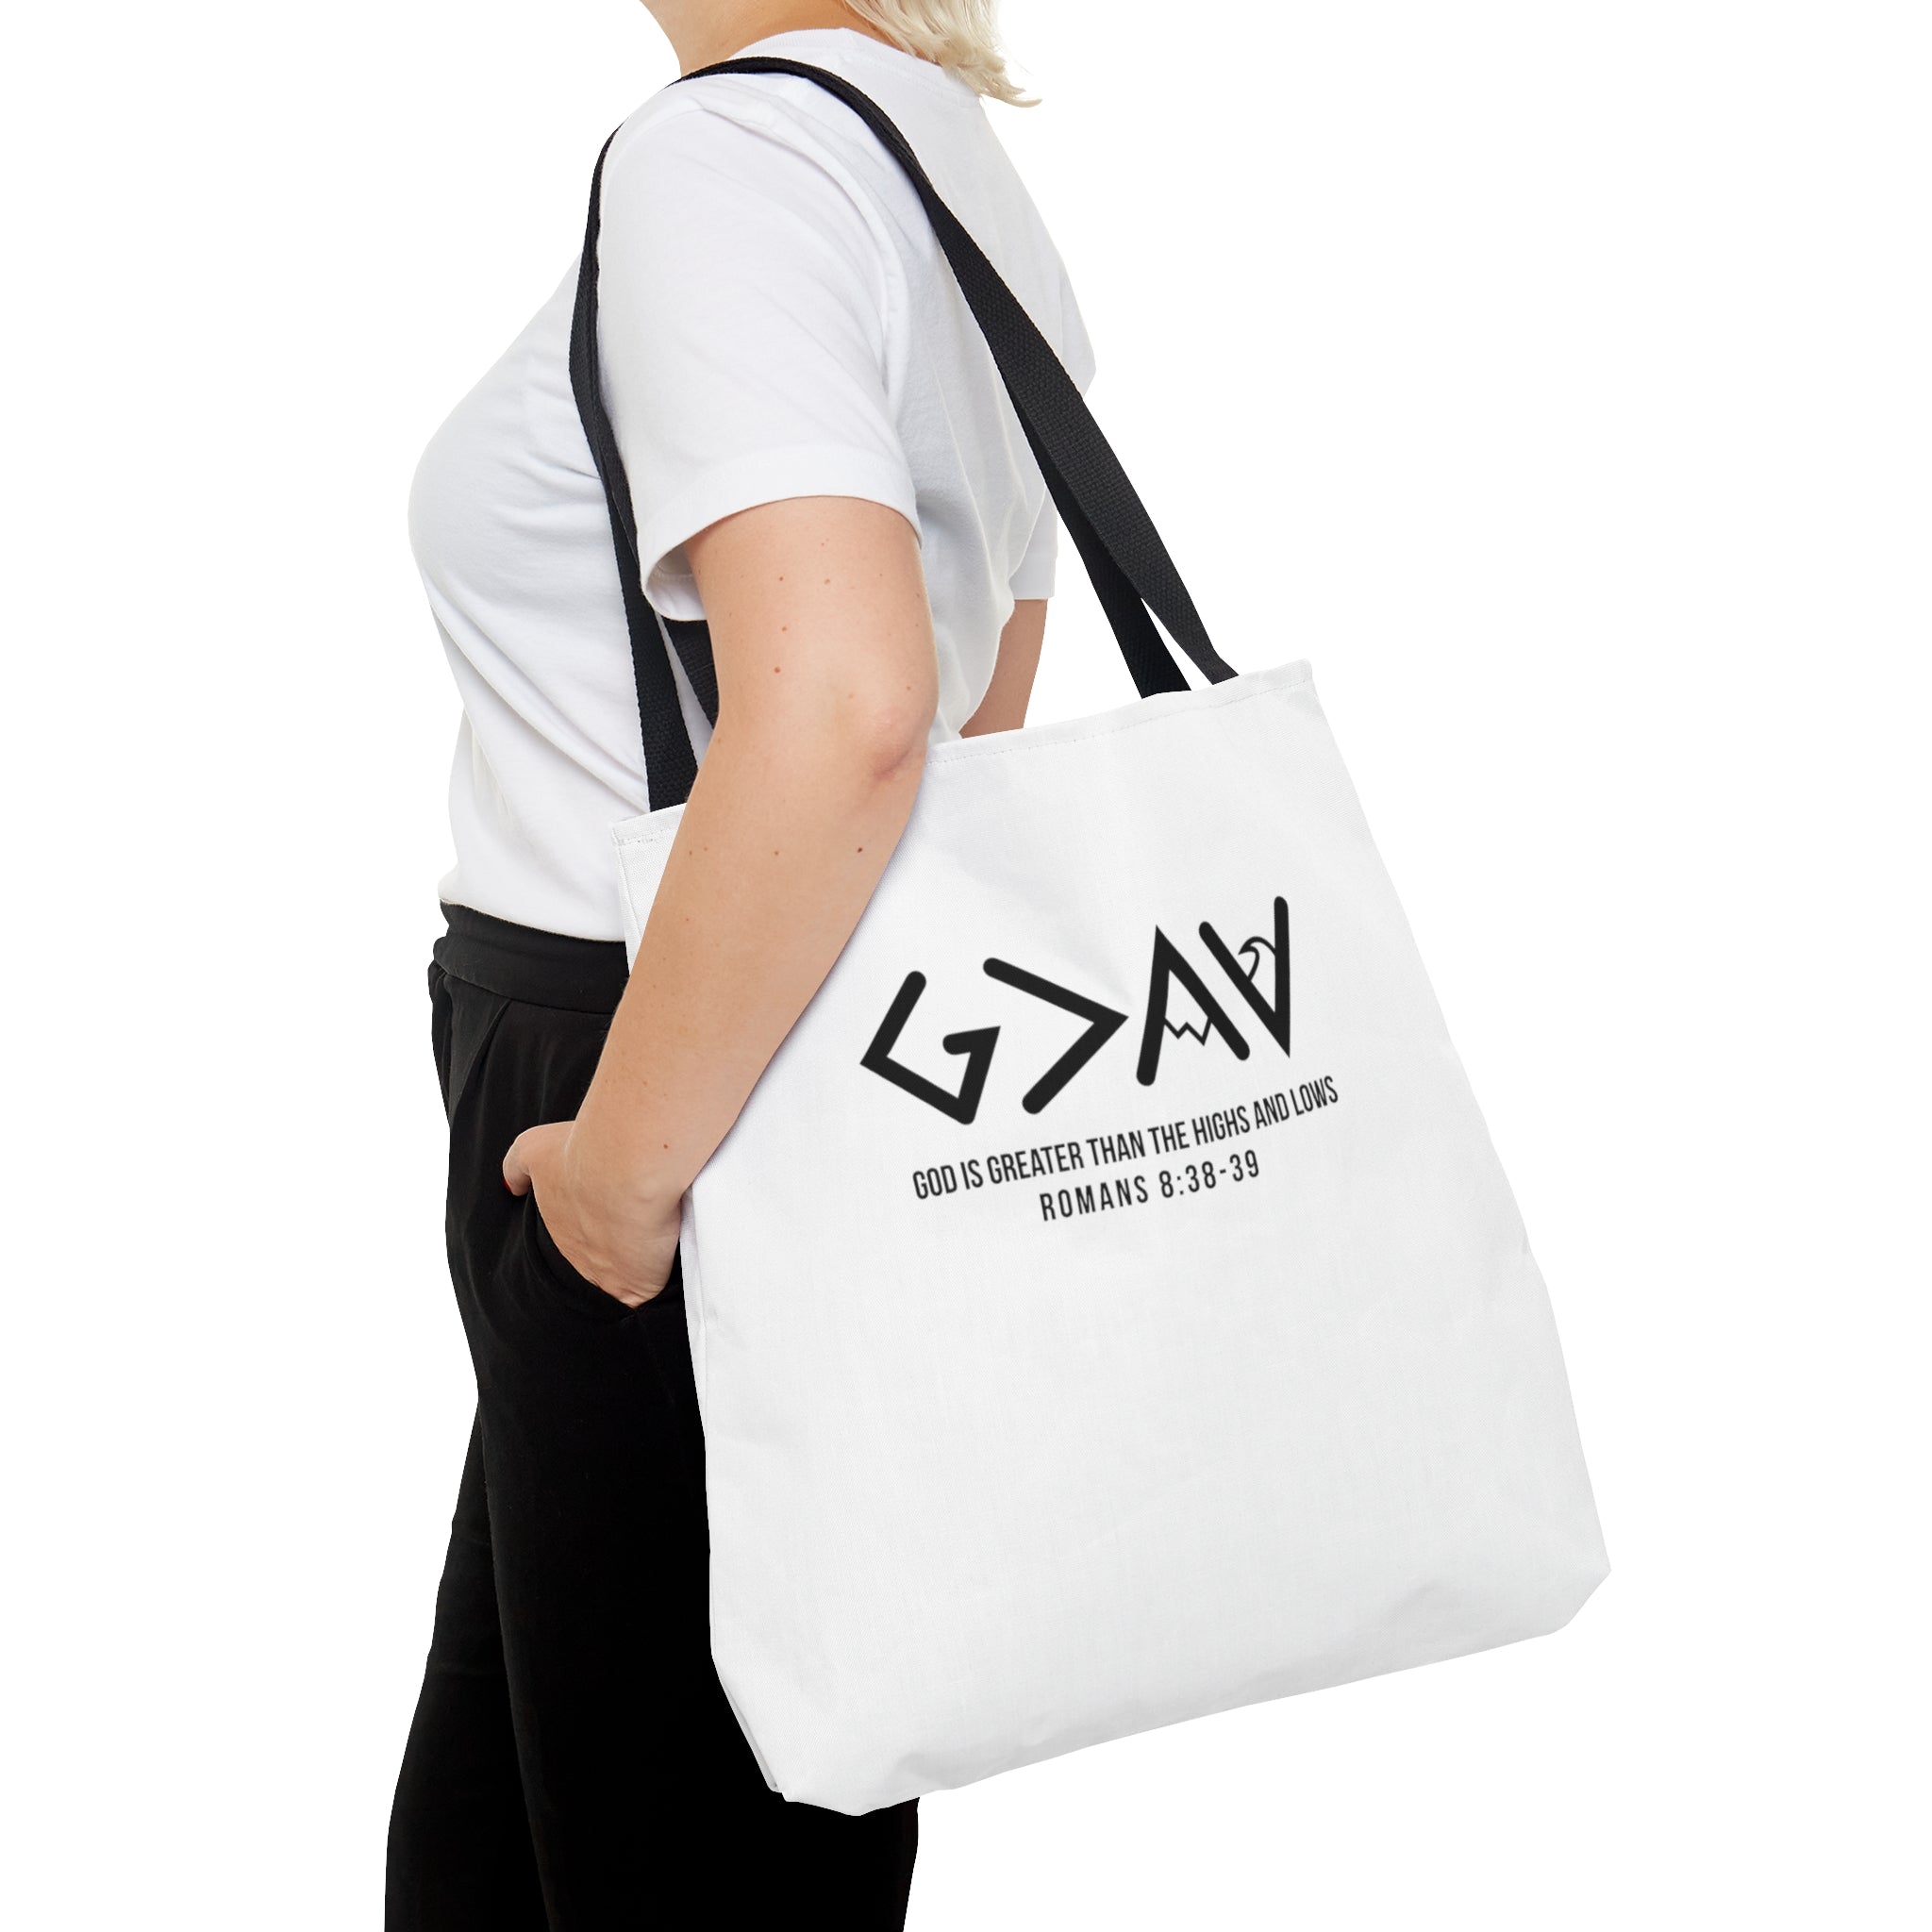 "God is greater" Tote Bag